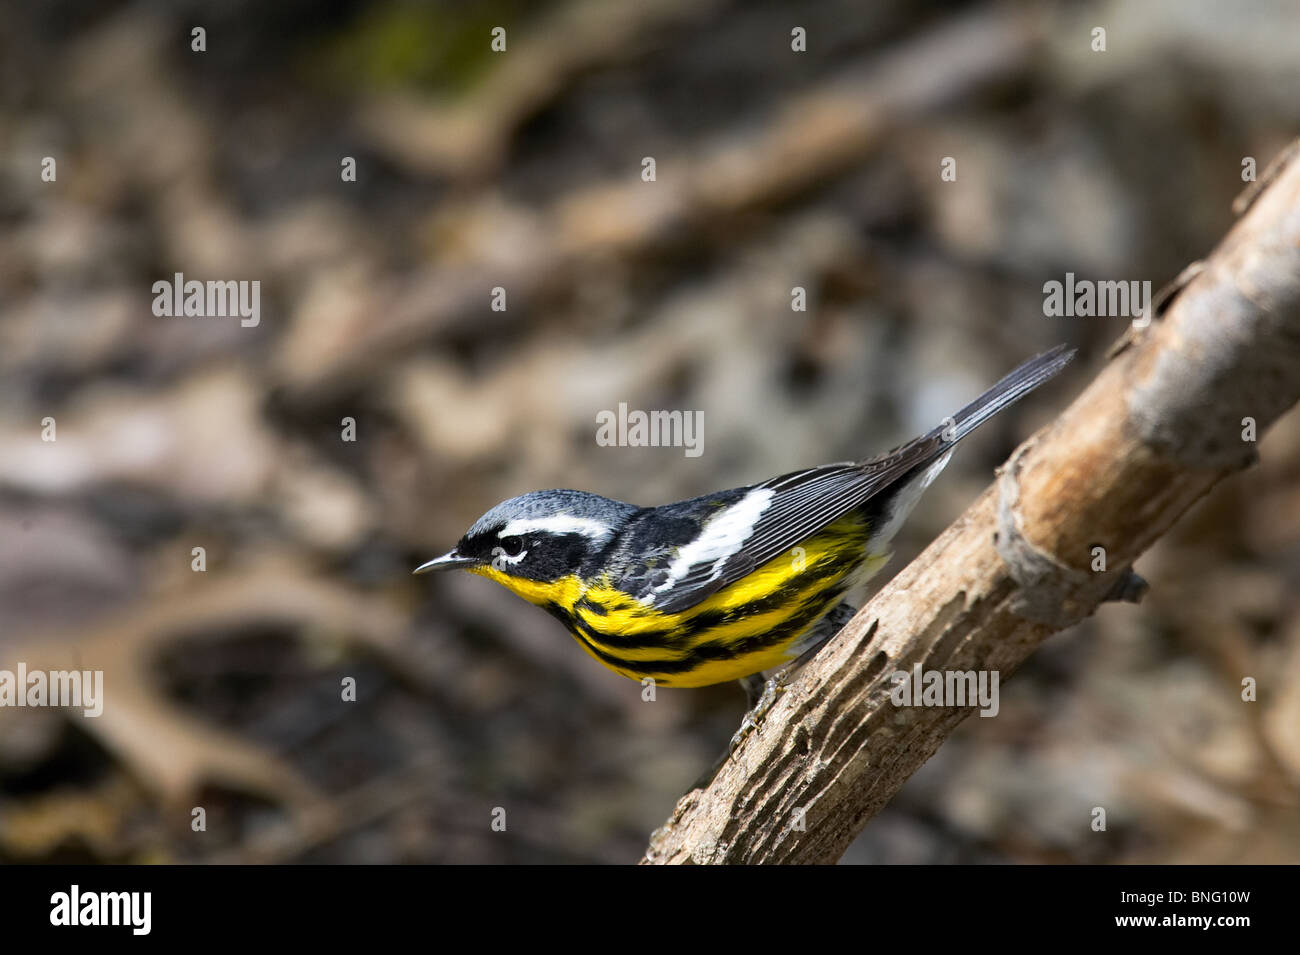 Adult Male Magnolia Warbler in Breeding Plumage Perched on a Branch Stock Photo